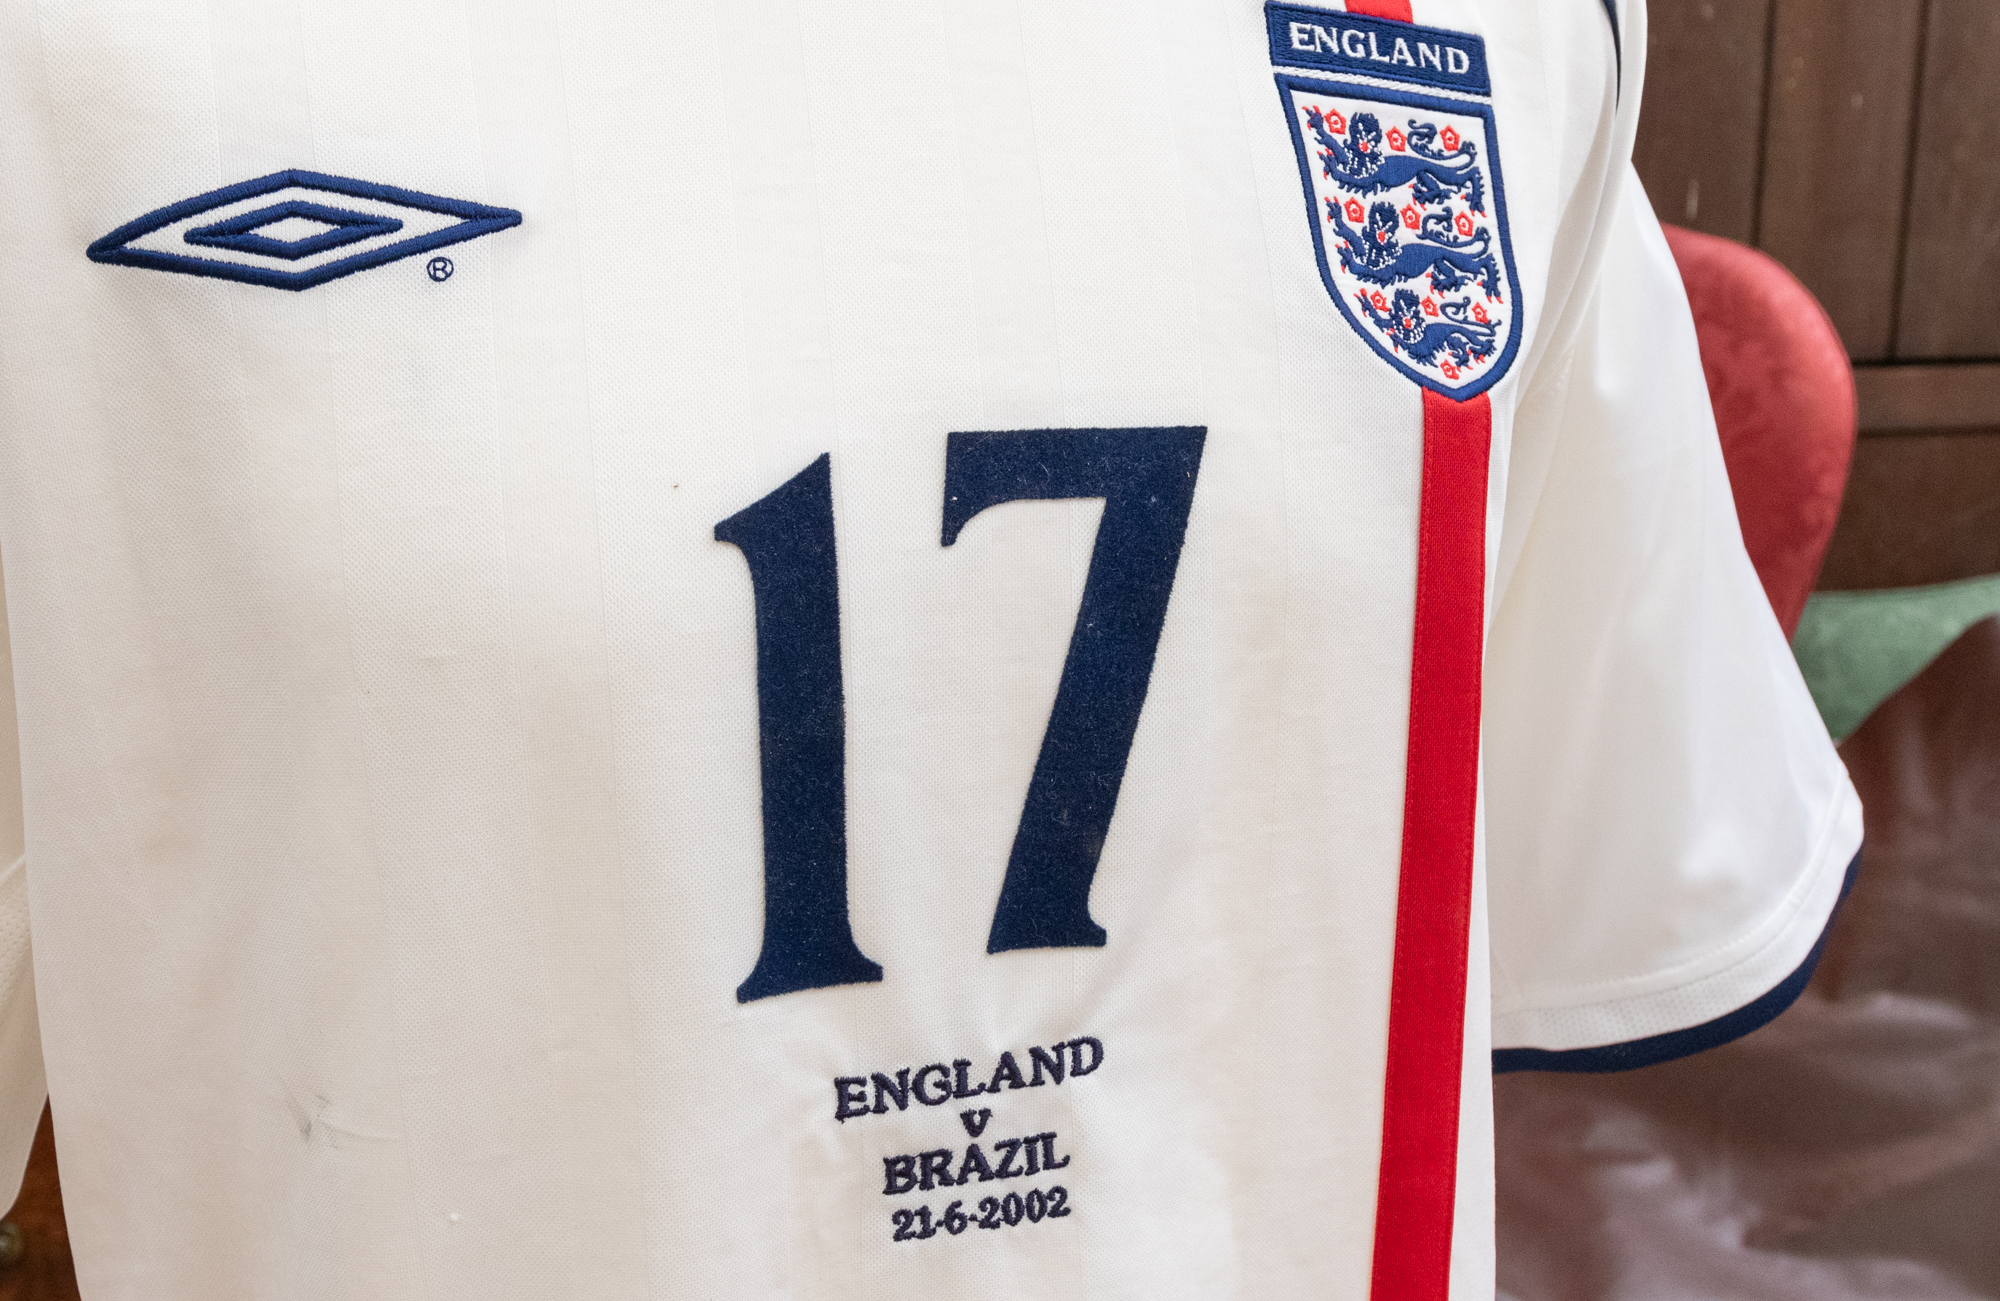 England: An England v. Brazil, World Cup 2002, 21st June 2002, match issued white England shirt. - Image 2 of 5